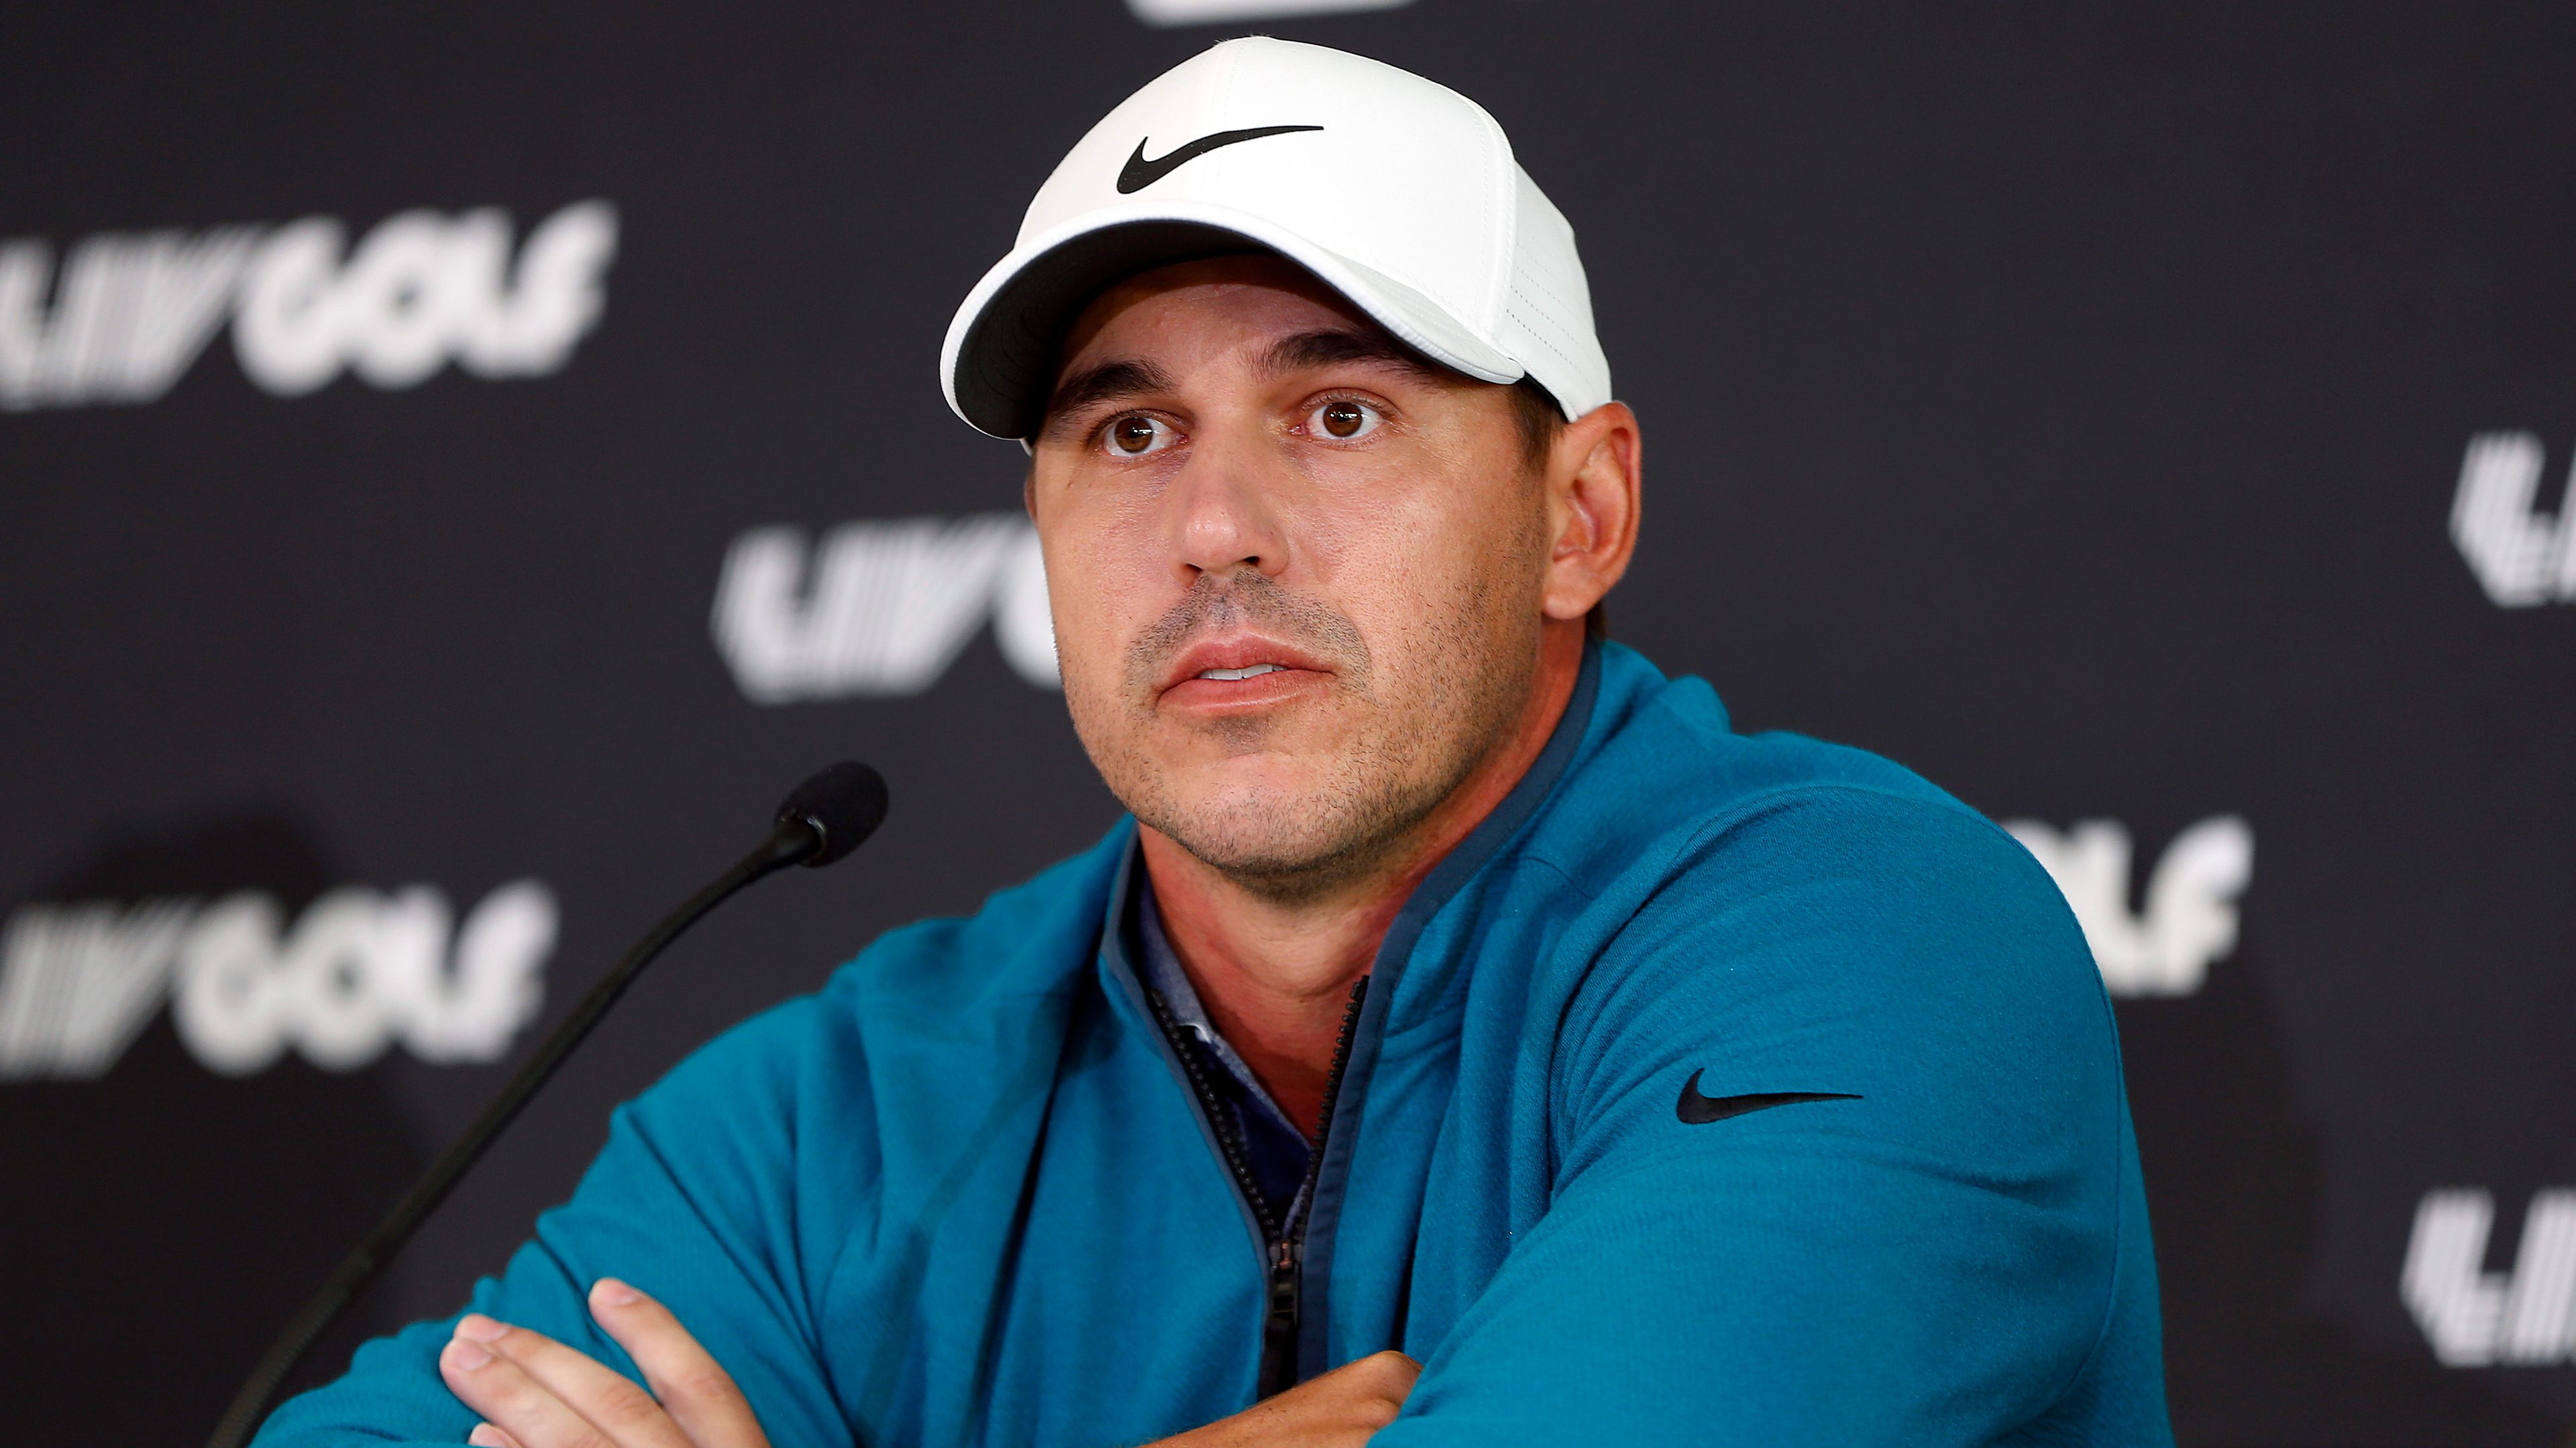 Brooks Koepka of the United States speaks to the media during a press conference prior to the LIV Golf Invitational - Portland at Pumpkin Ridge Golf Club on June 28, 2022 in North Plains, Oregon. (Photo by Jonathan Ferrey/LIV Golf via Getty Images)